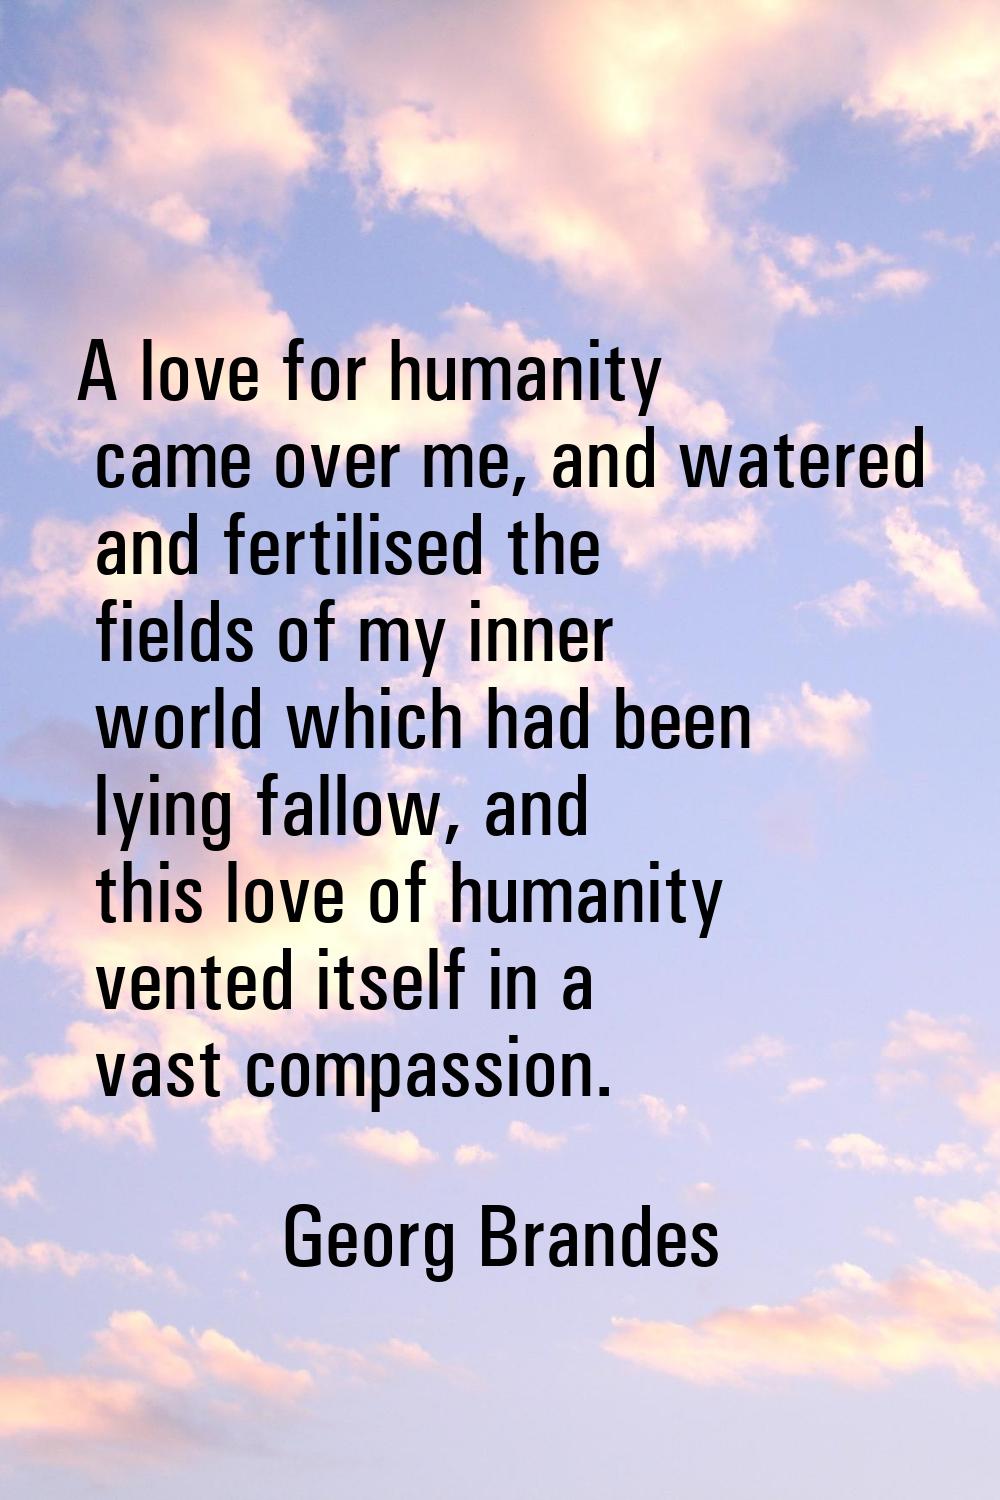 A love for humanity came over me, and watered and fertilised the fields of my inner world which had